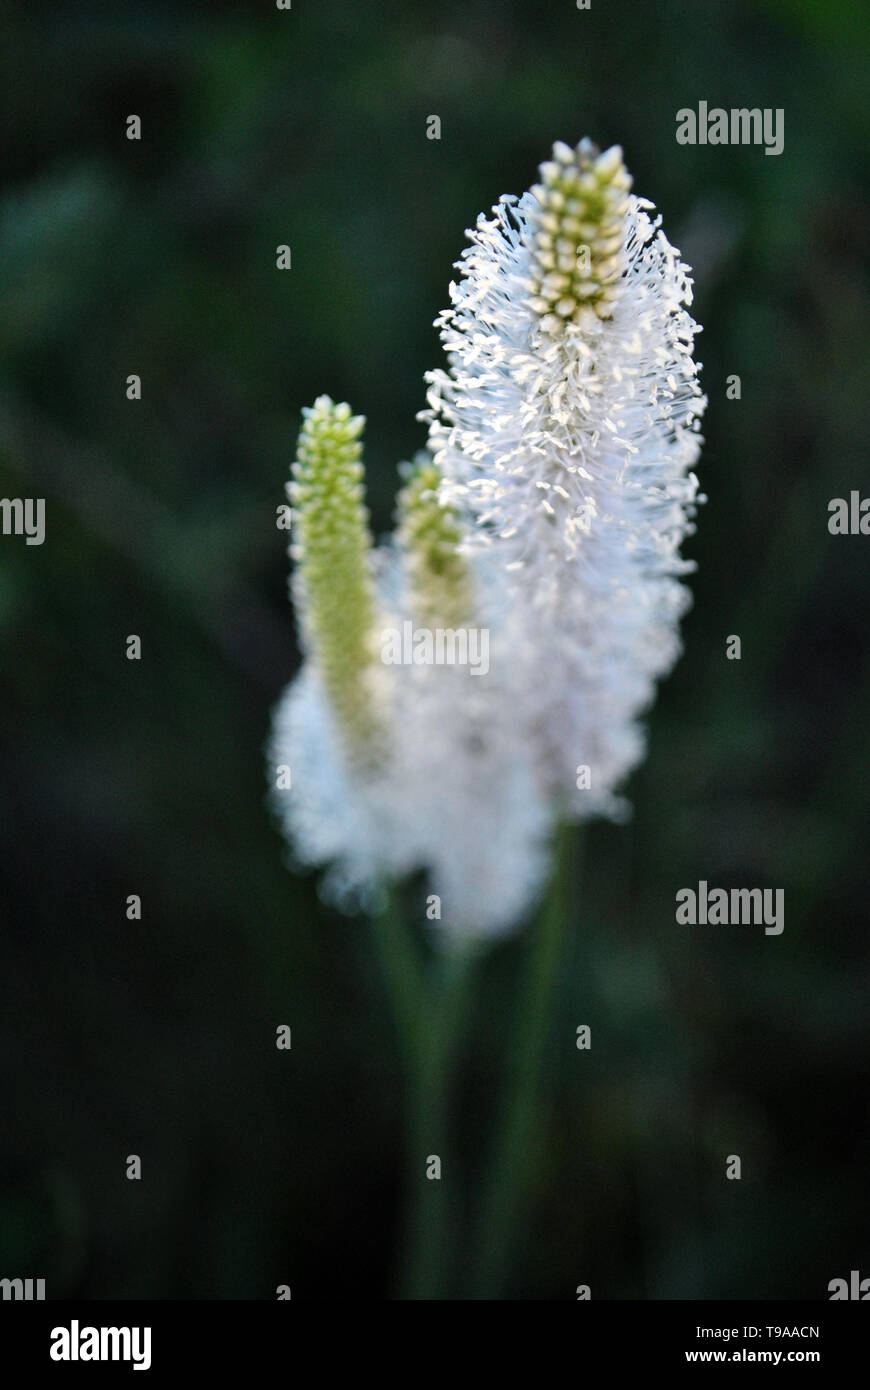 Greater Plantain or fleaworts (Plantago major) plant white fluffy flowers blooming on blurry dark green background Stock Photo